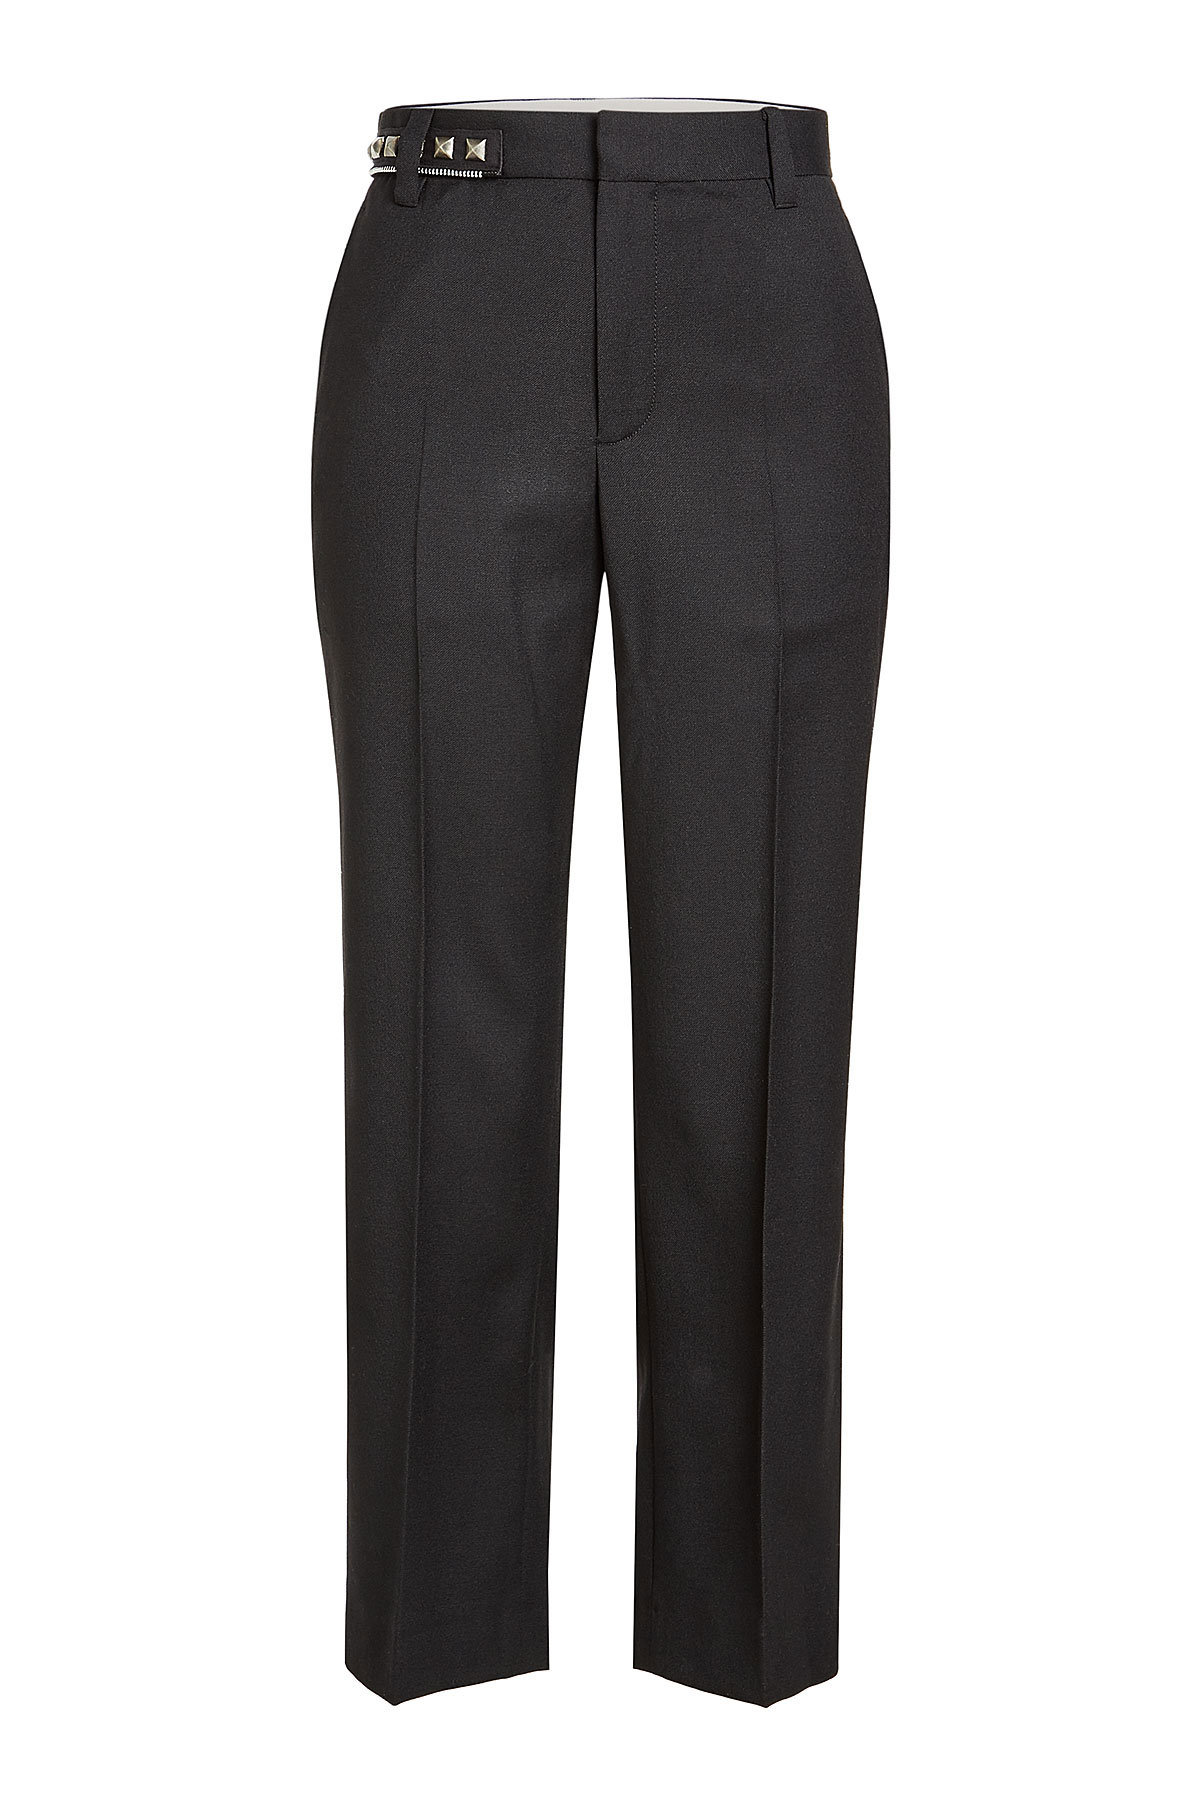 Marc Jacobs - Cropped Wool Pants with Studded Waistline